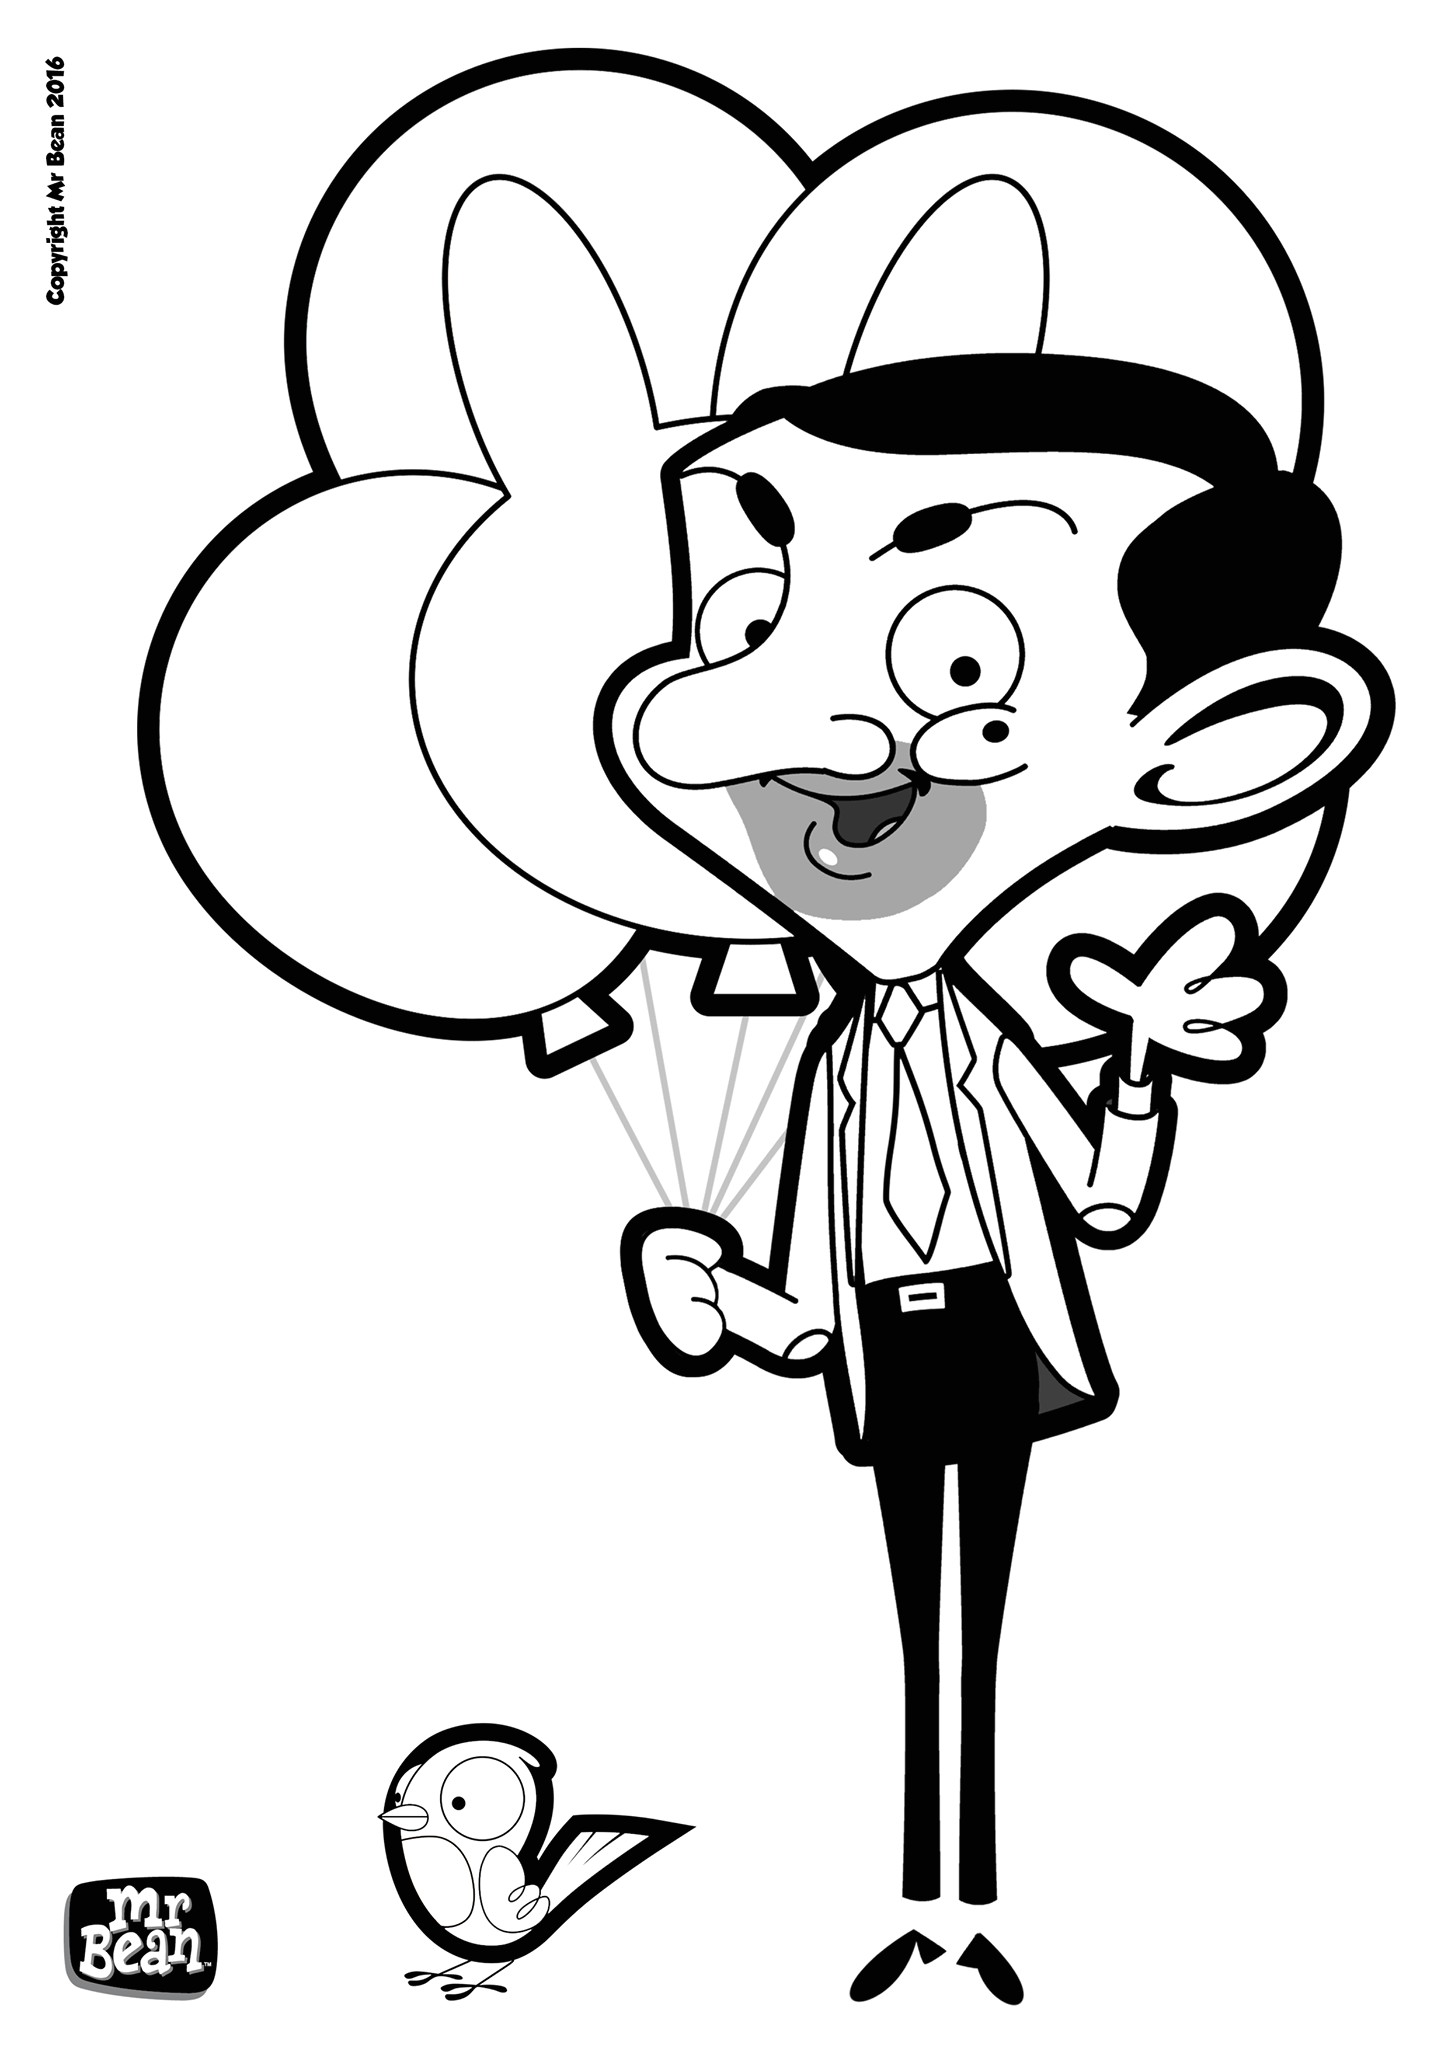 Mr Bean Coloriage Mr Bean Colouring Pages Mr Bean Avaboard